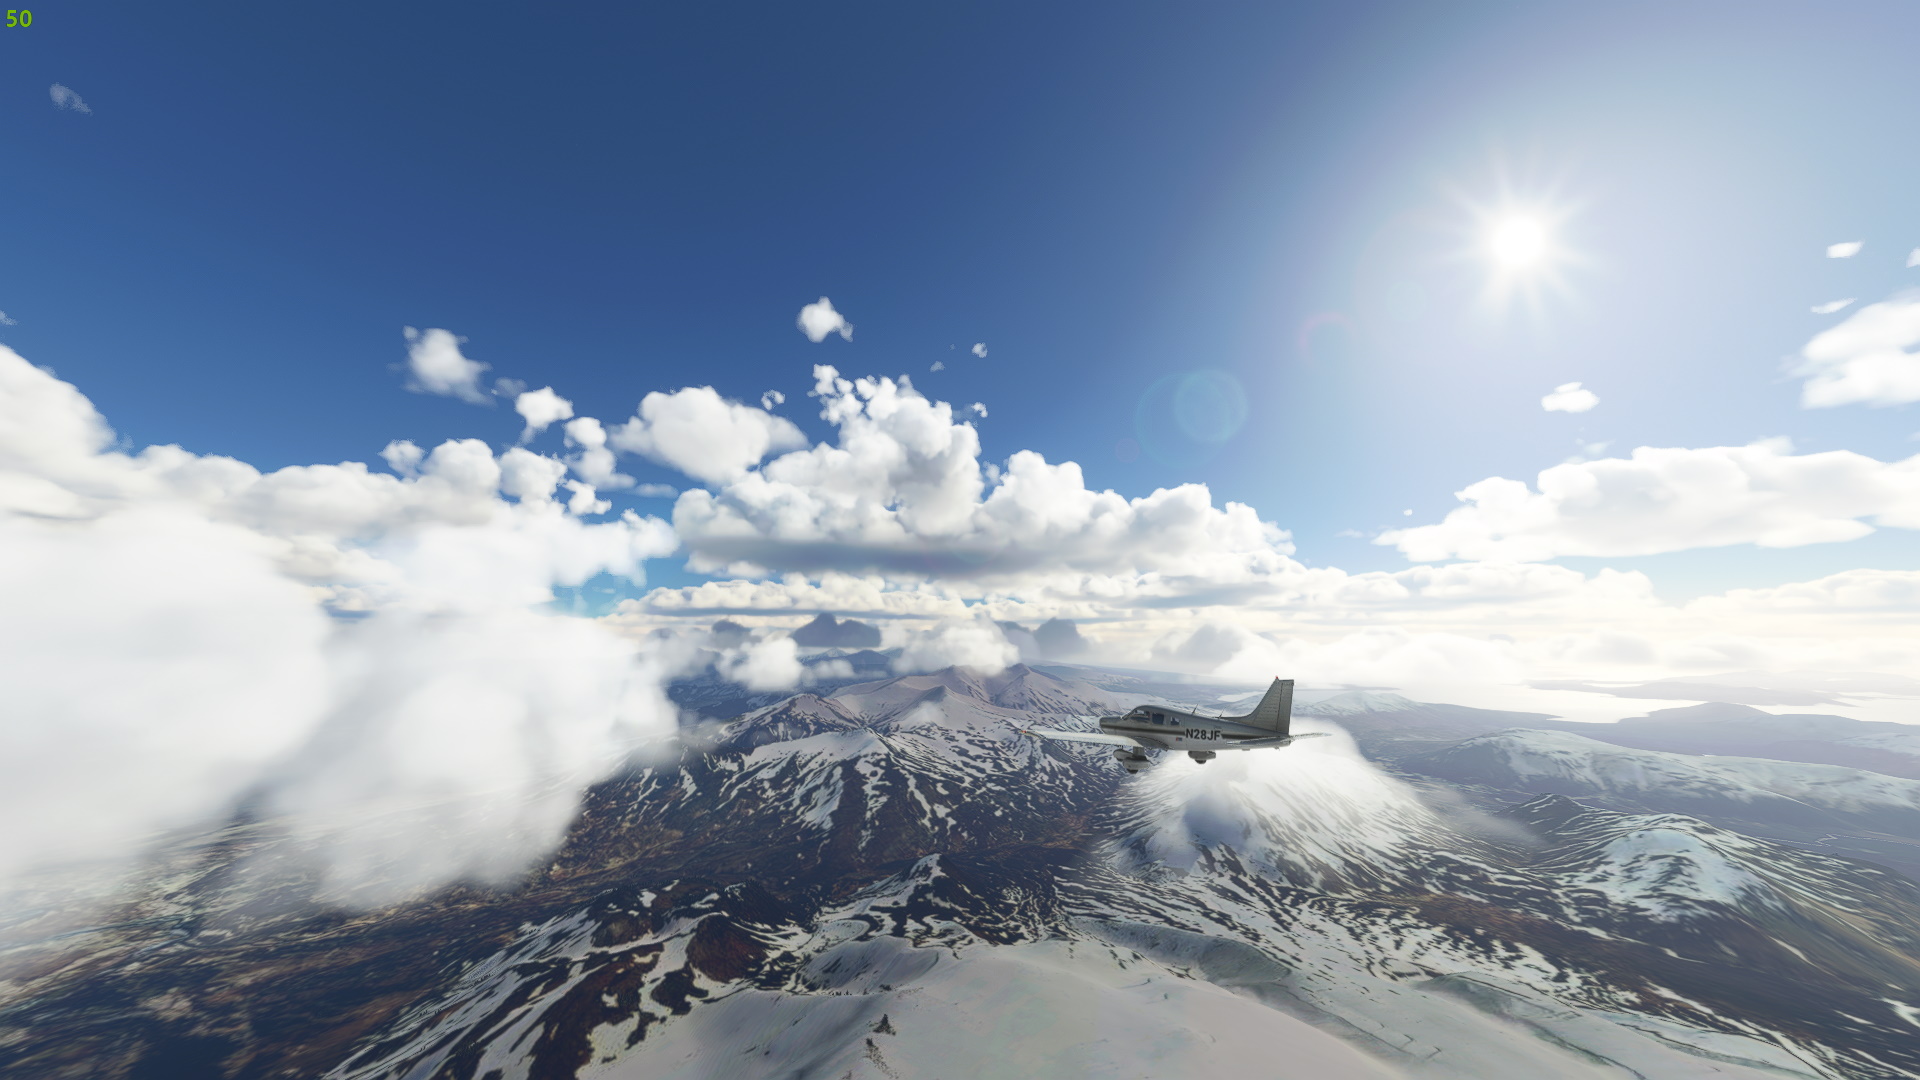 Microsoft Flight Simulator is about to get a huge performance boost